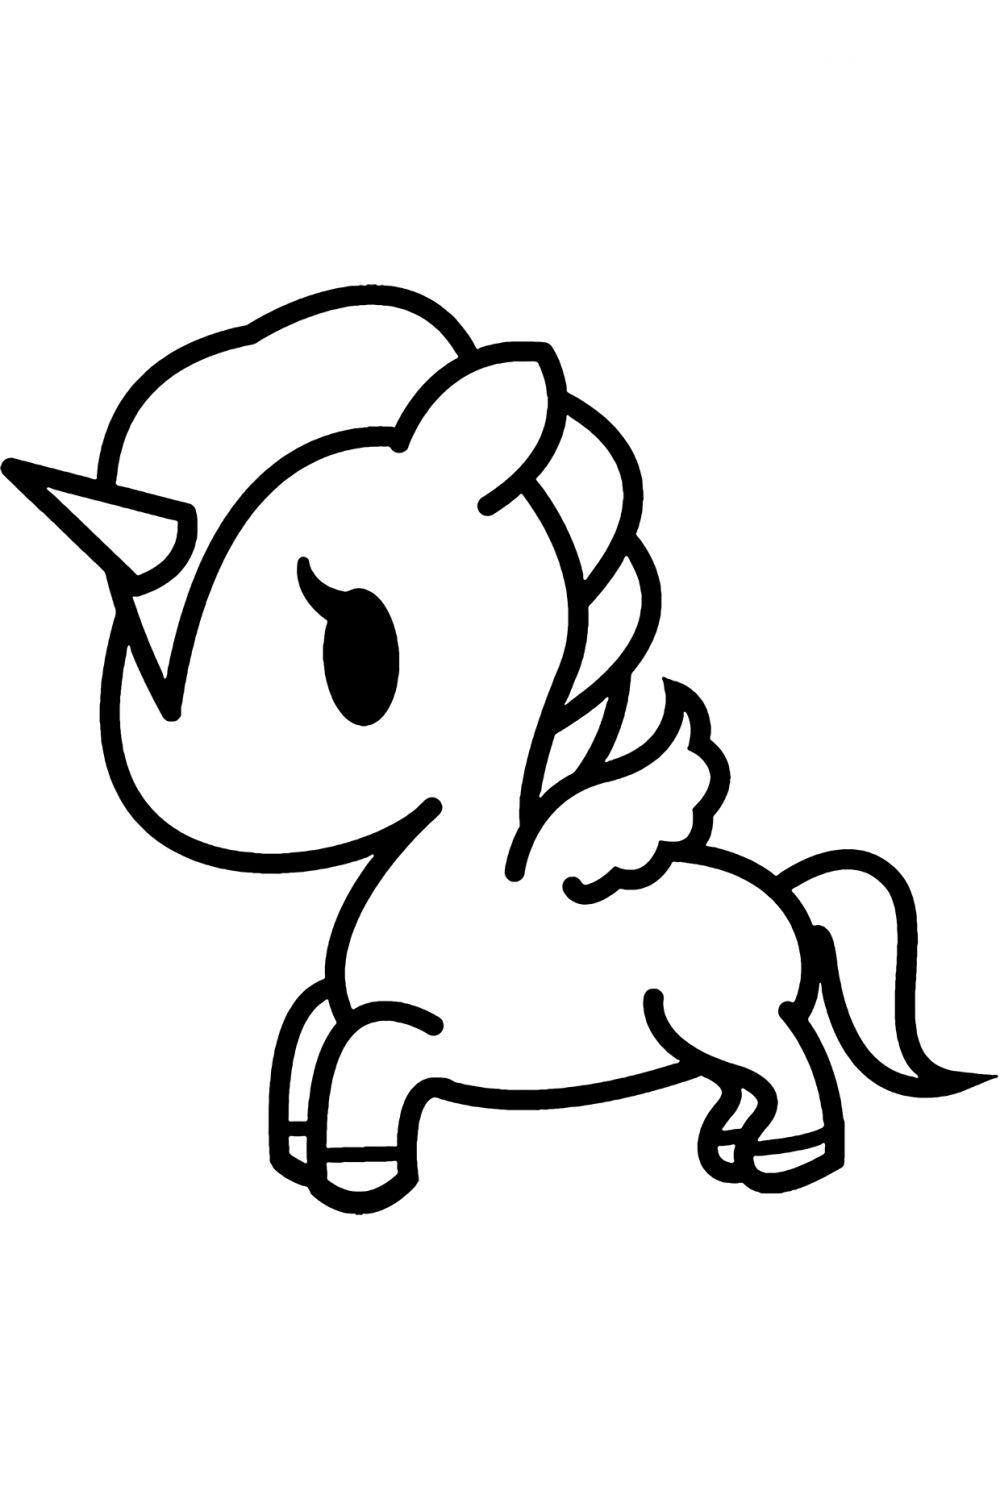 Cute unicorn coloring pages   YouLoveIt.com